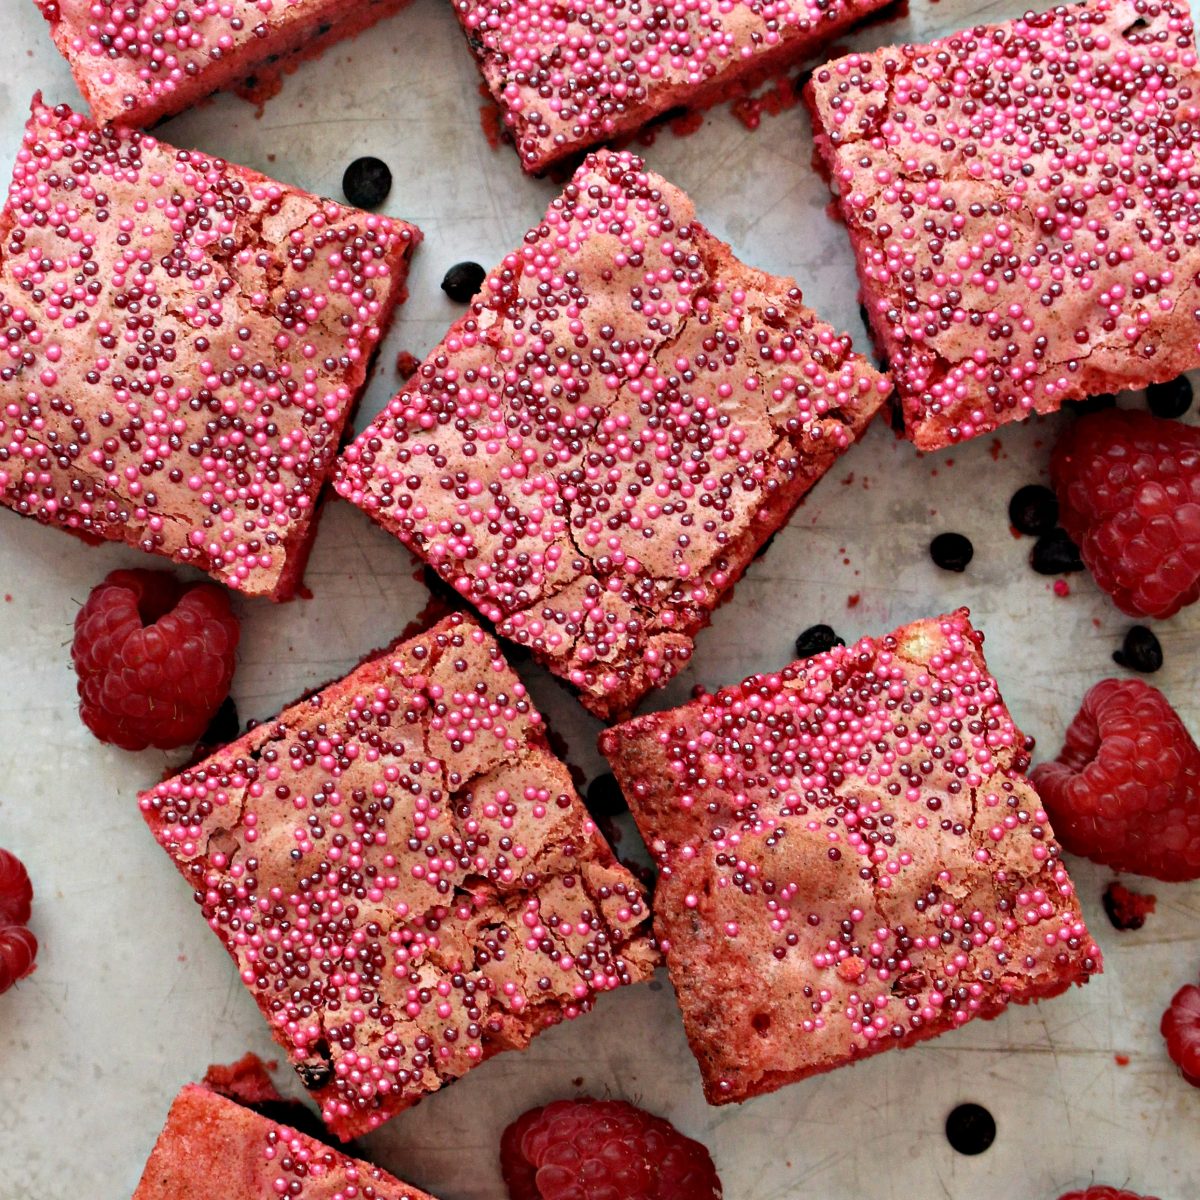 Closeup of Raspberry Chocolate Chip Bars with red and pink nonpareil sprinkles on top.